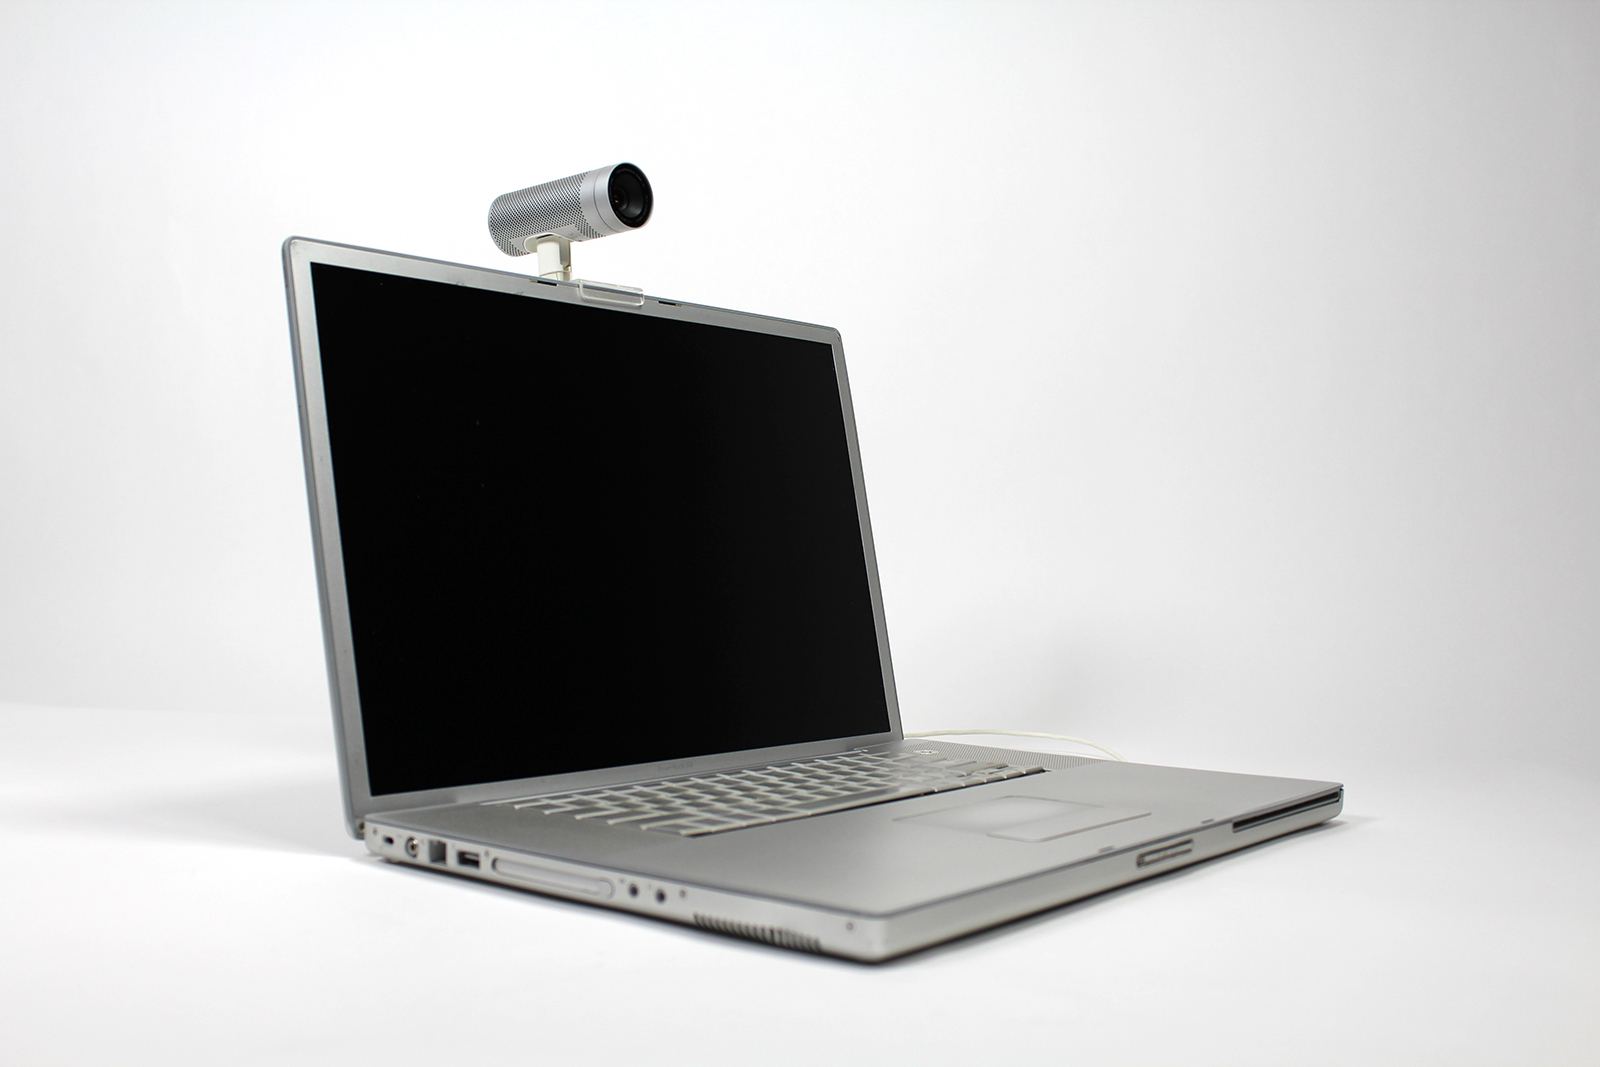 iSight Camera and 17-inch PowerBook G4